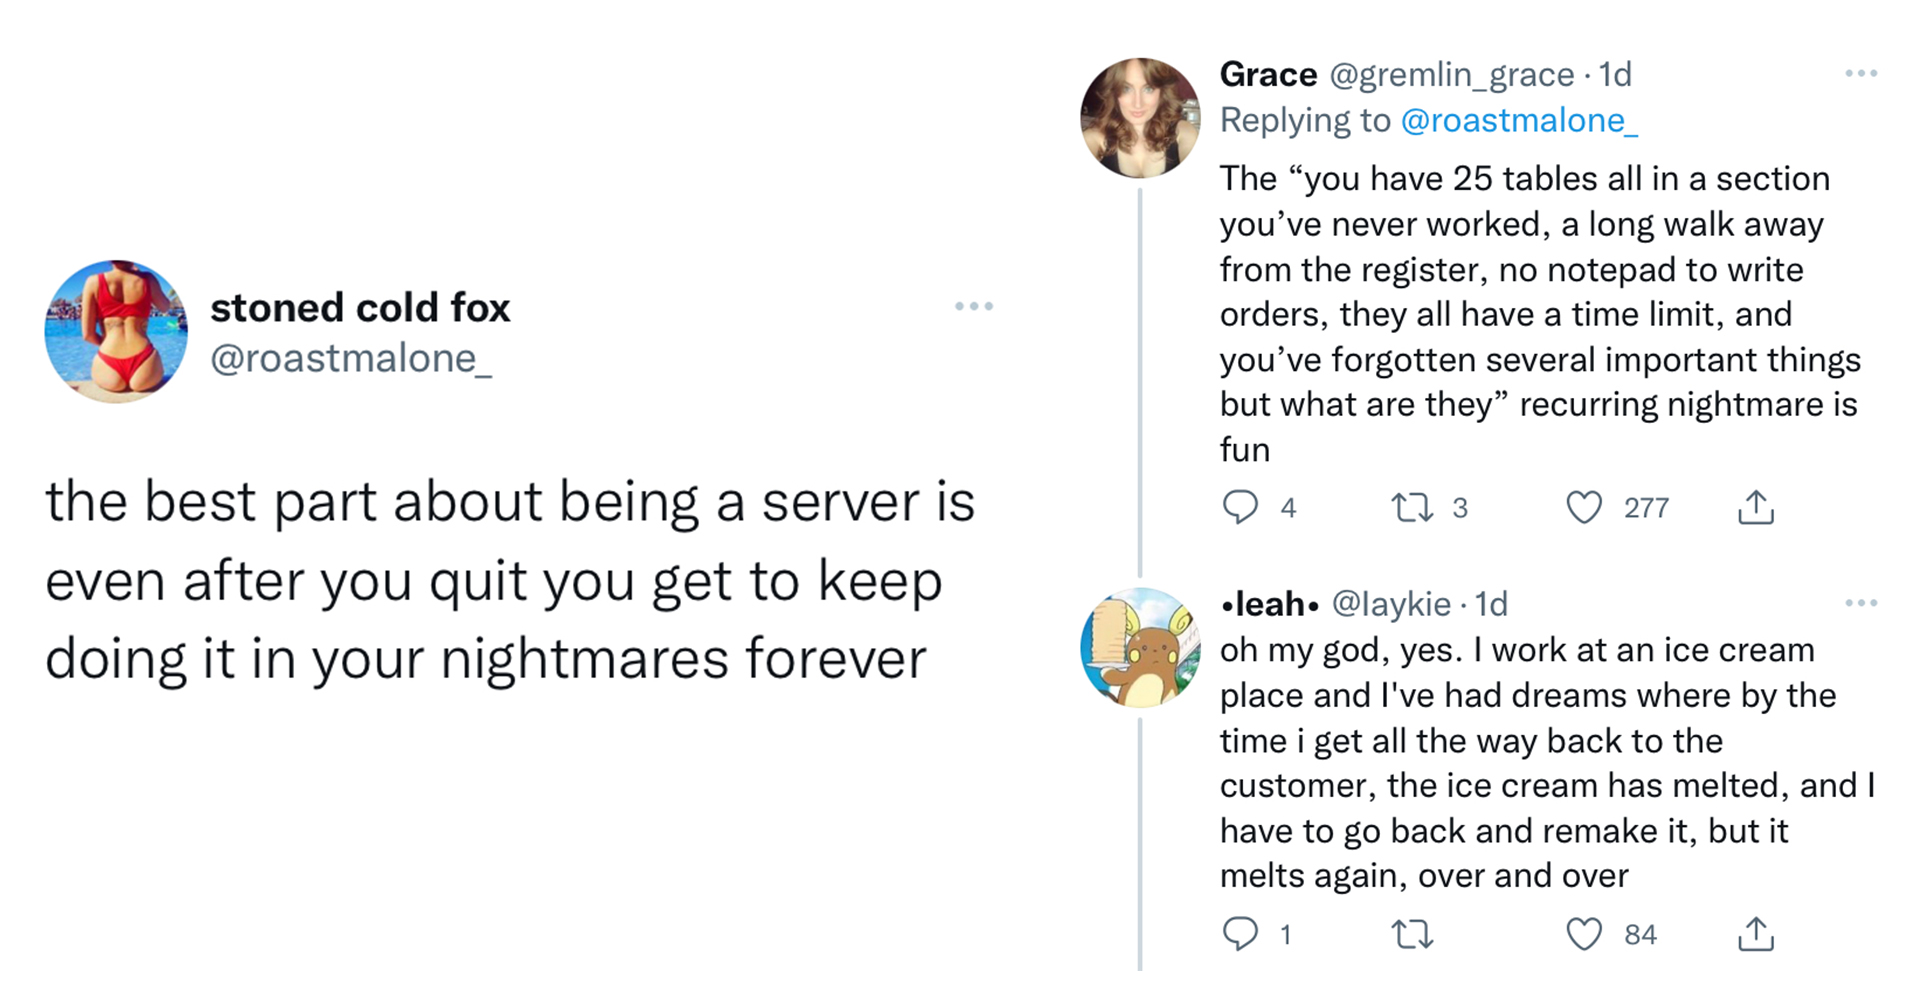 former-servers-relive-the-nightmare-of-food-service-in-viral-thread